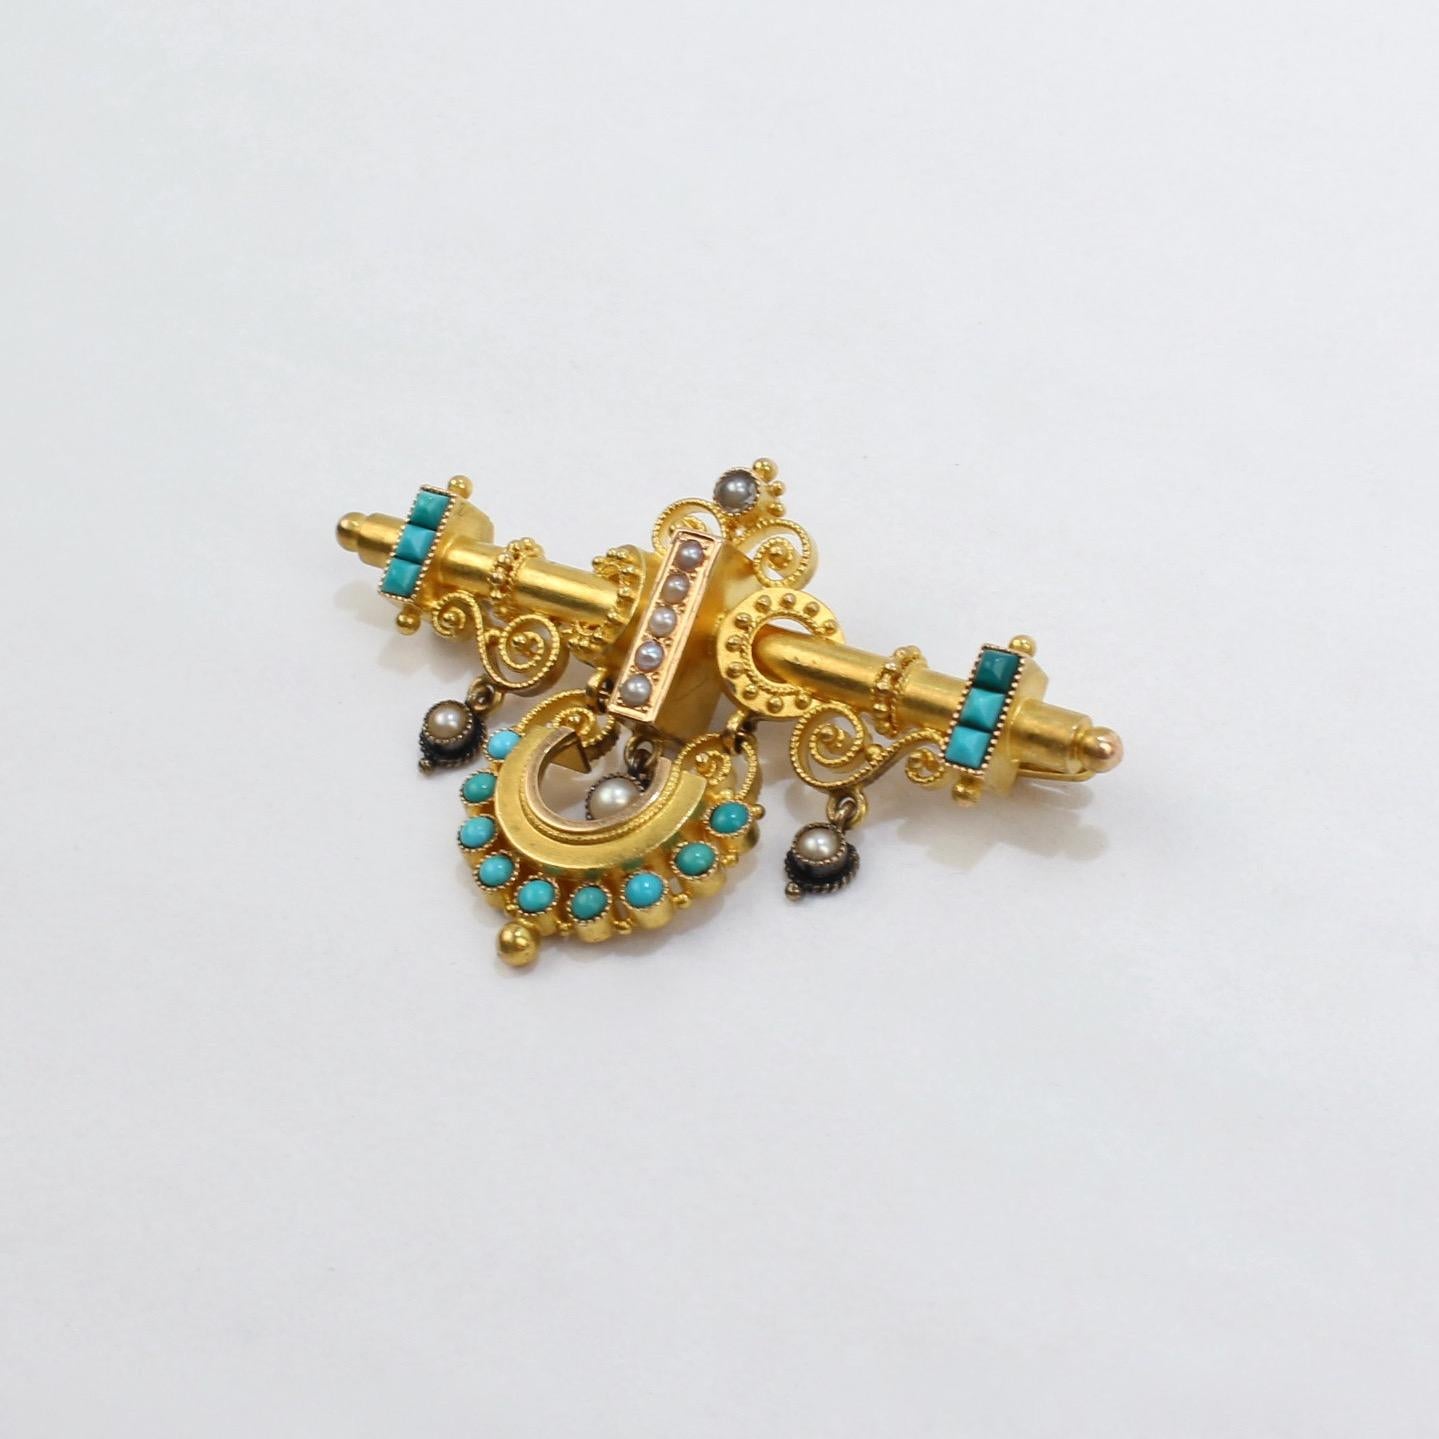 Cabochon Victorian Etruscan Revival 14 Karat Gold, Turquoise and Pearl Brooch or Pin For Sale